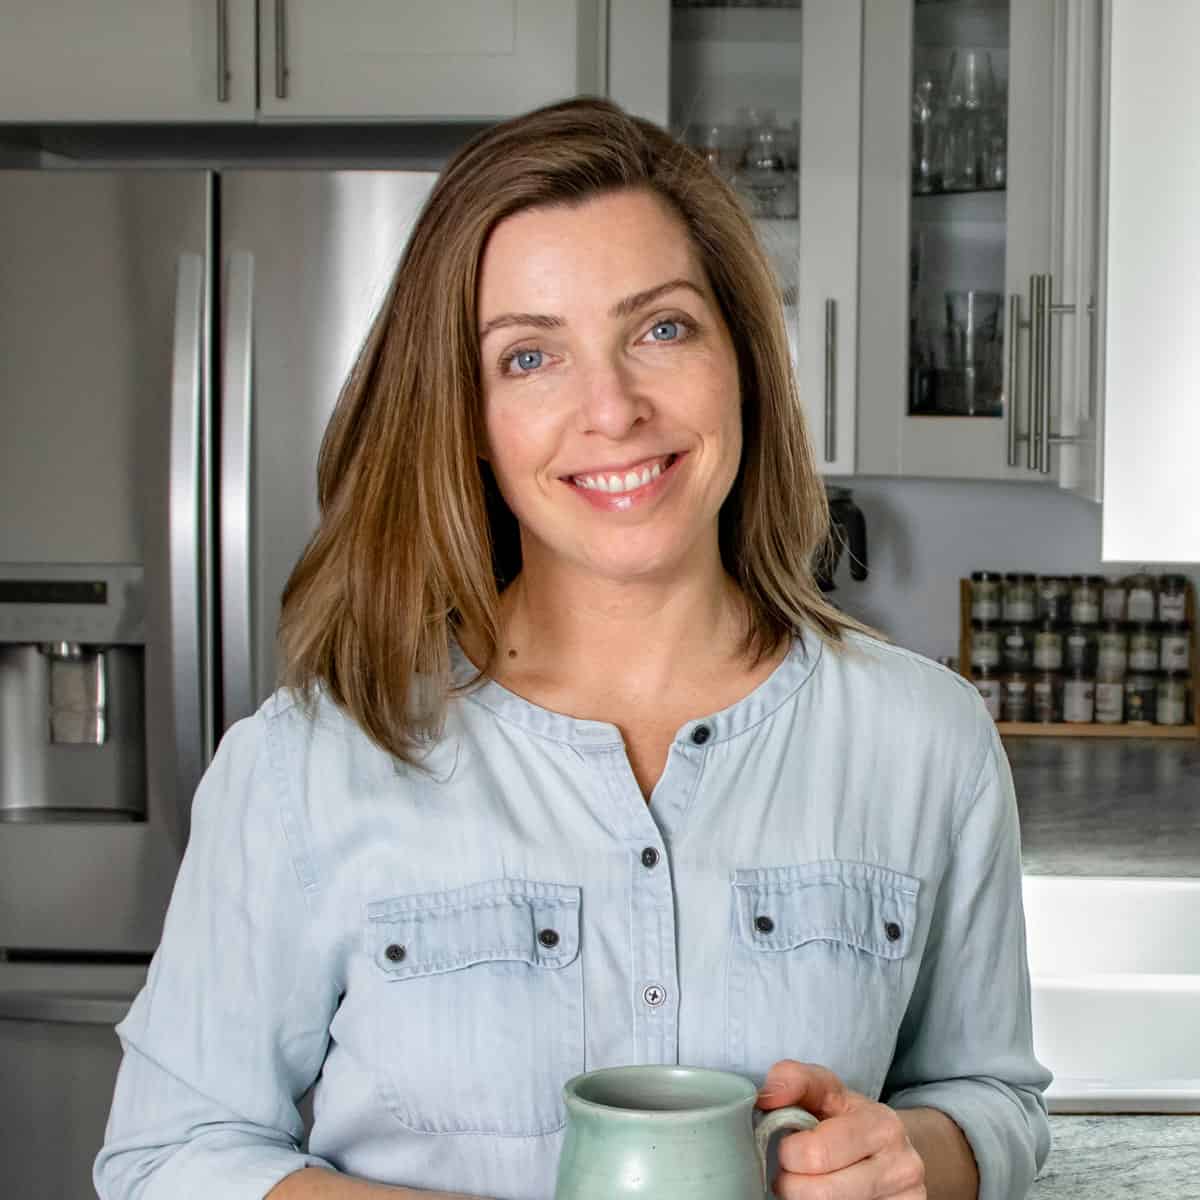 the author standing in her kitchen.